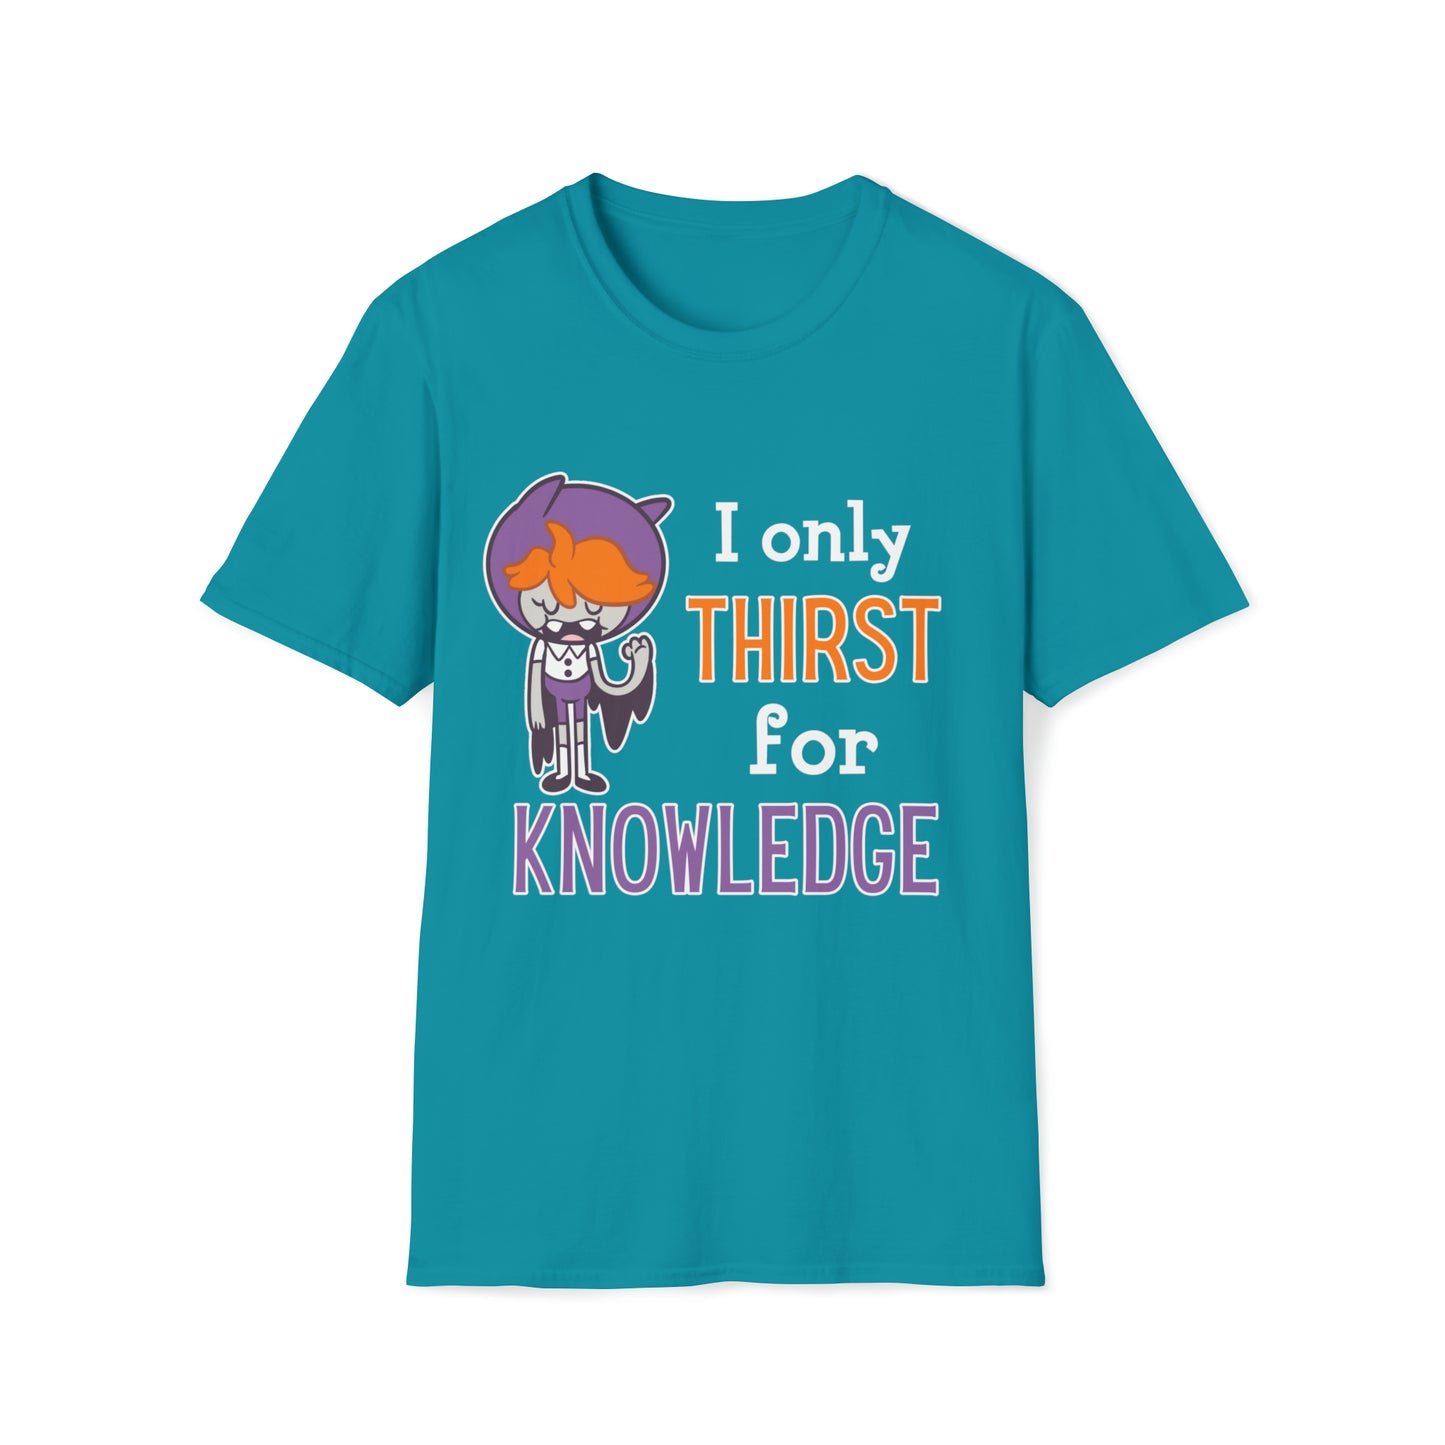 Milly - I only Thirst for Knowledge - Unisex Softstyle T-Shirt